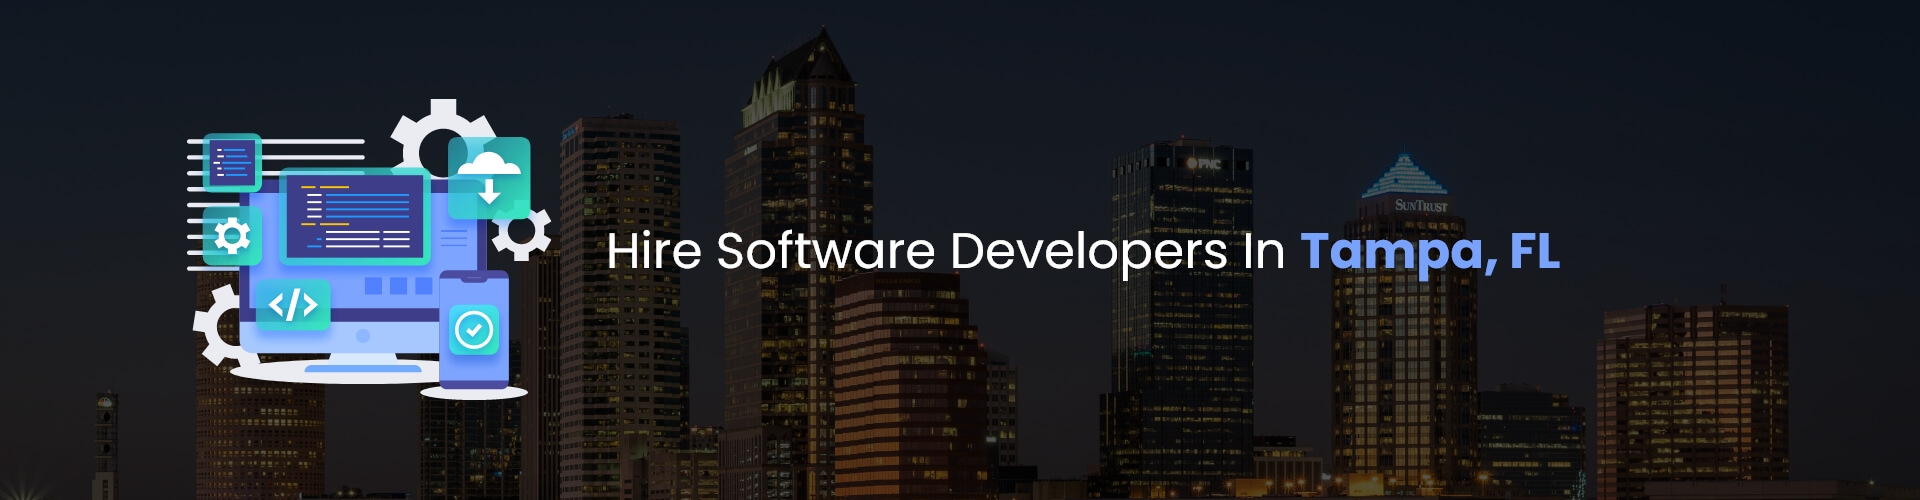 hire software developers in tampa, fl